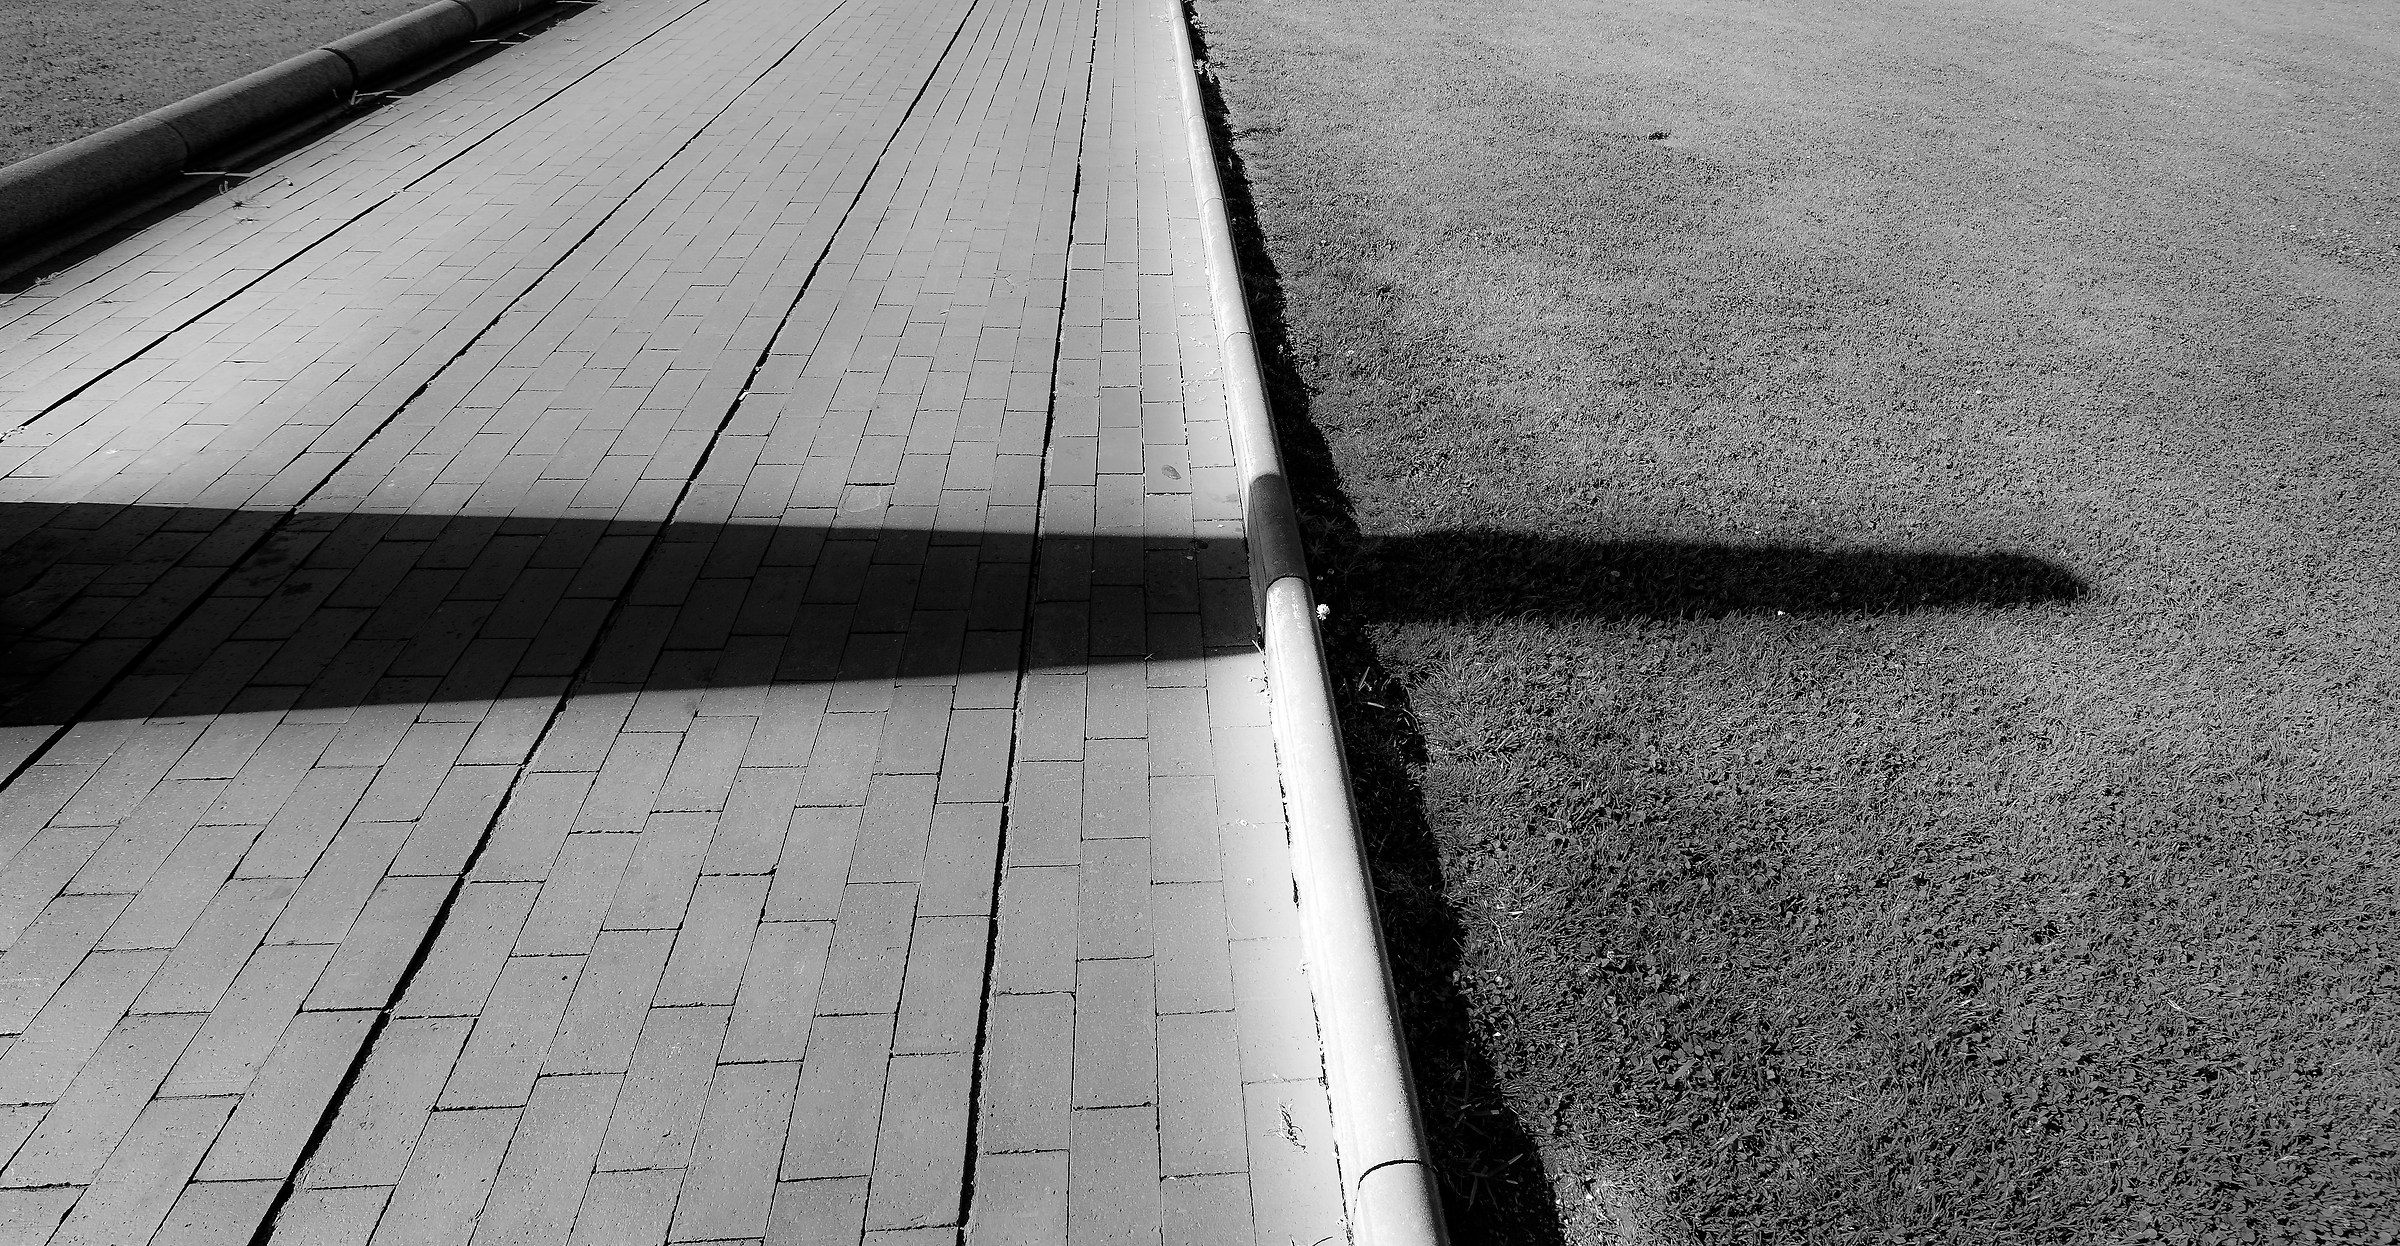 The relentless shadow walk past 'the curb ......